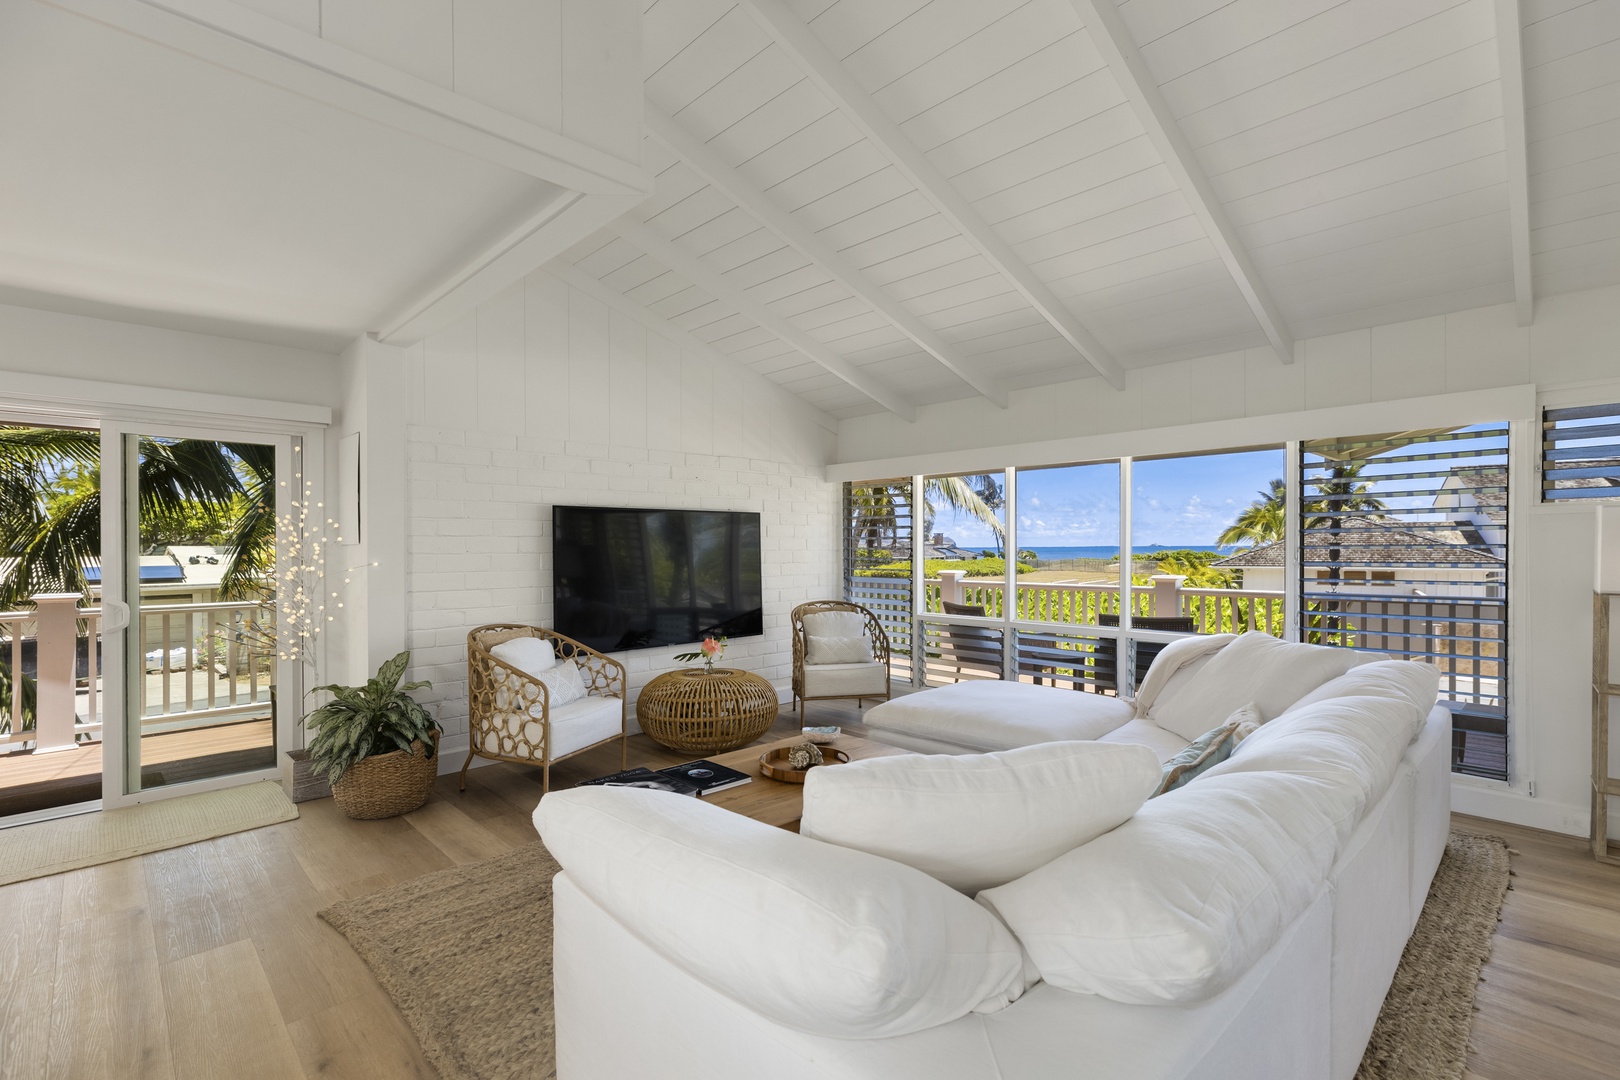 Kailua Vacation Rentals, Ranch Beach House Estate - Front House Living Room with Ocean Views